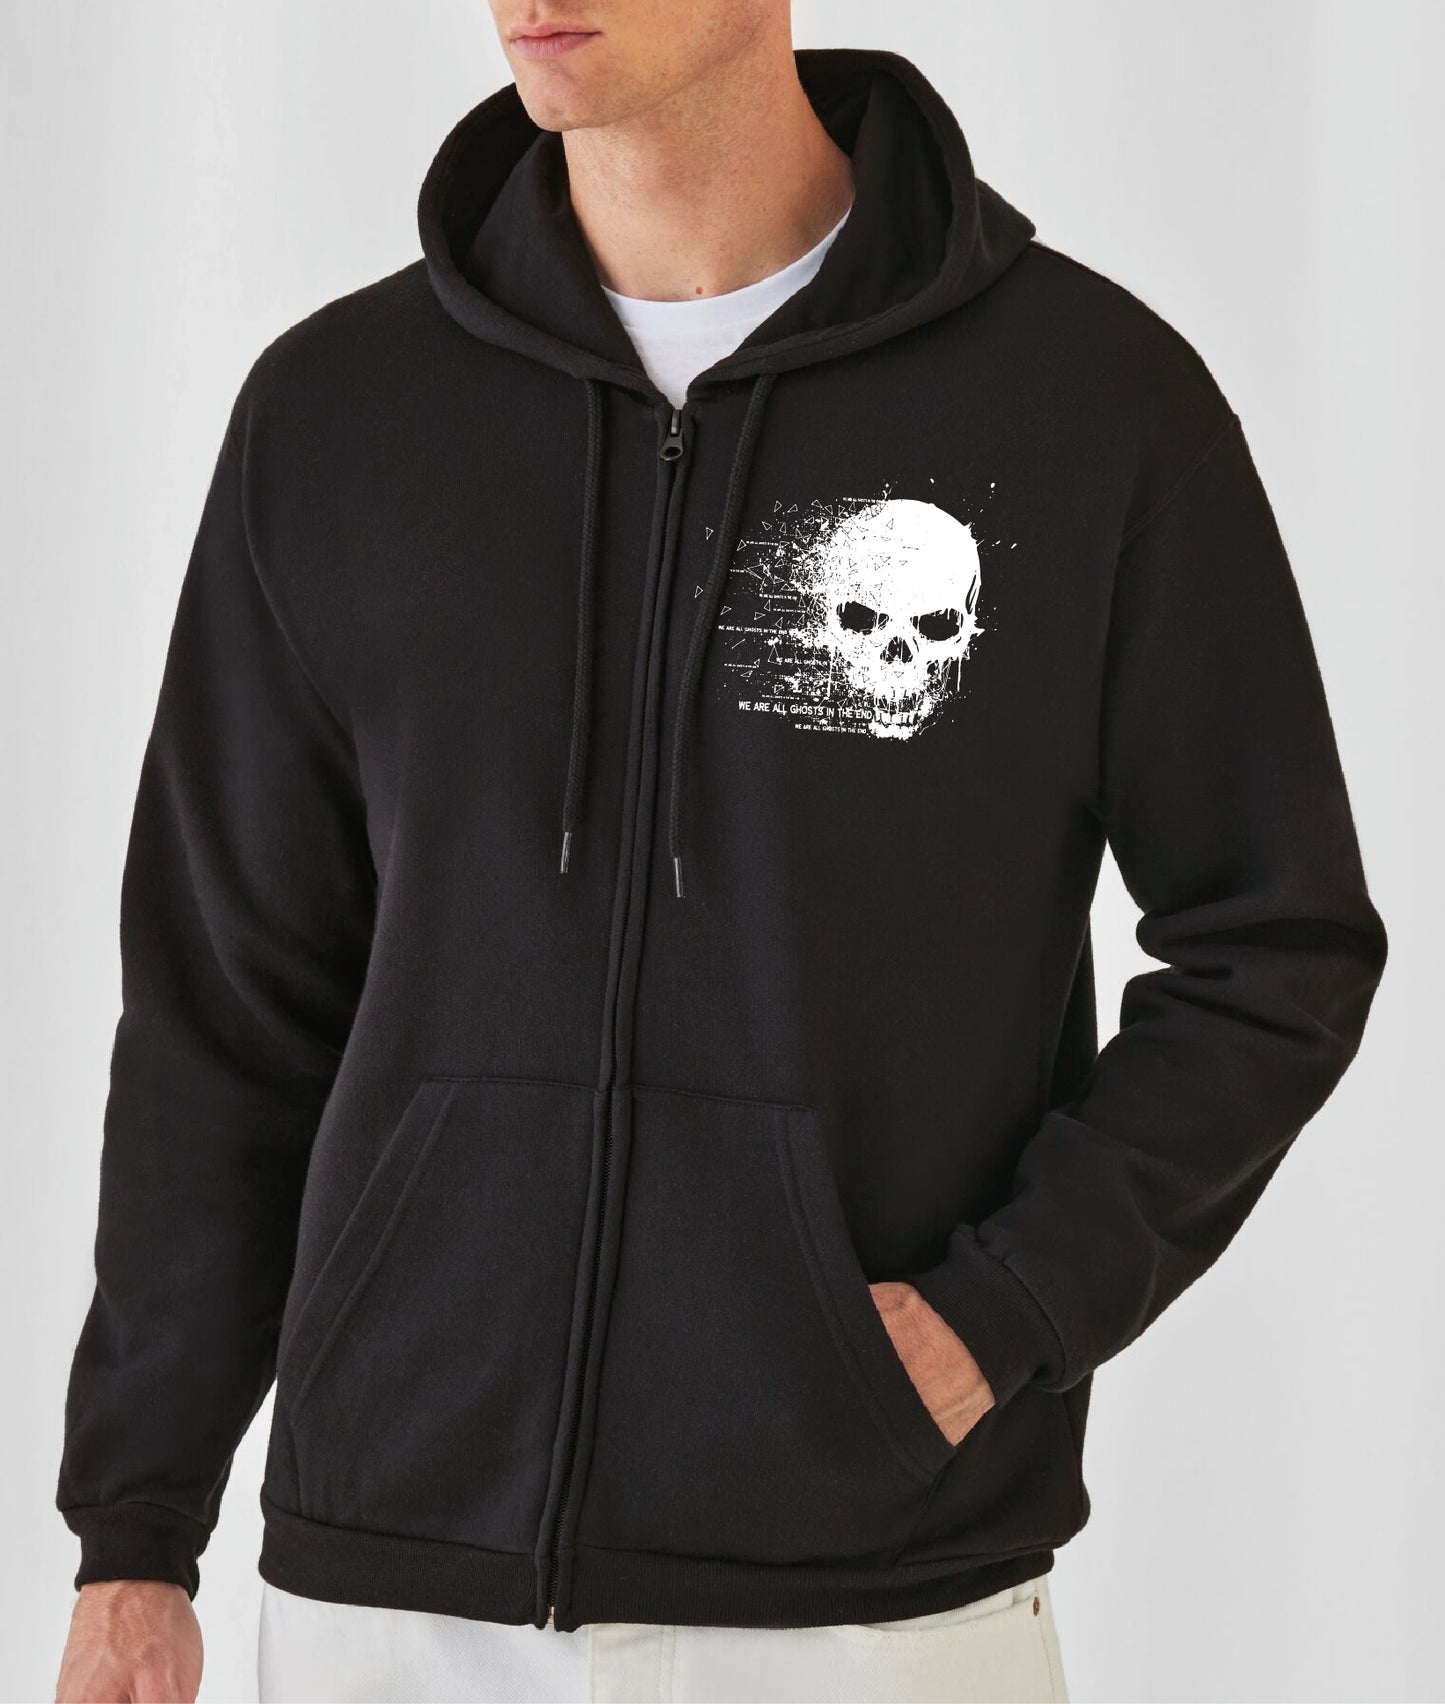 We Are All Ghosts In The End - Digital Decay Zip Hoodie